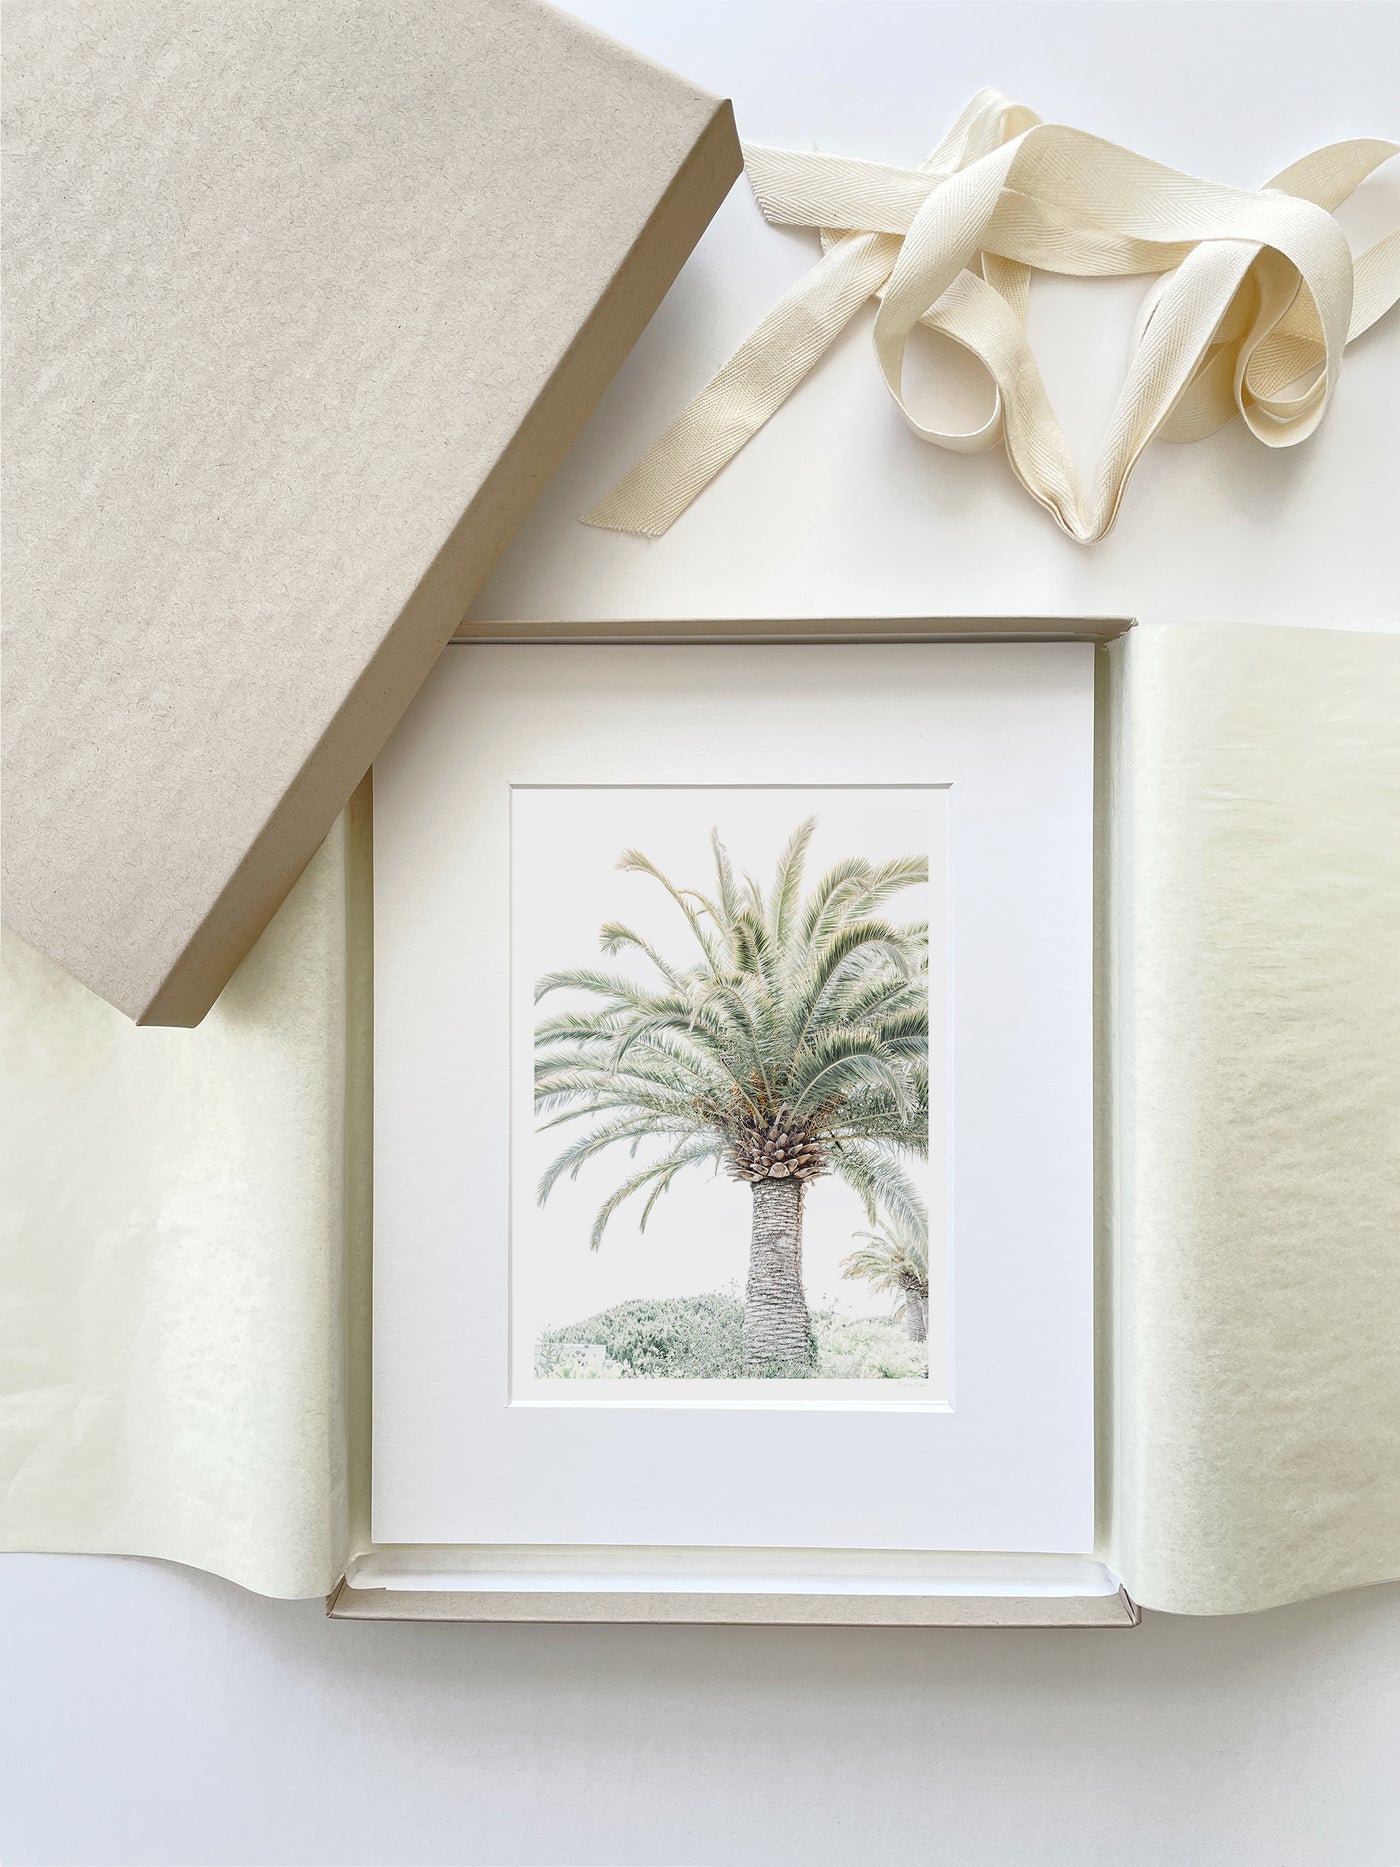 Palm tree art print by Cattie Coyle Photography in gift box